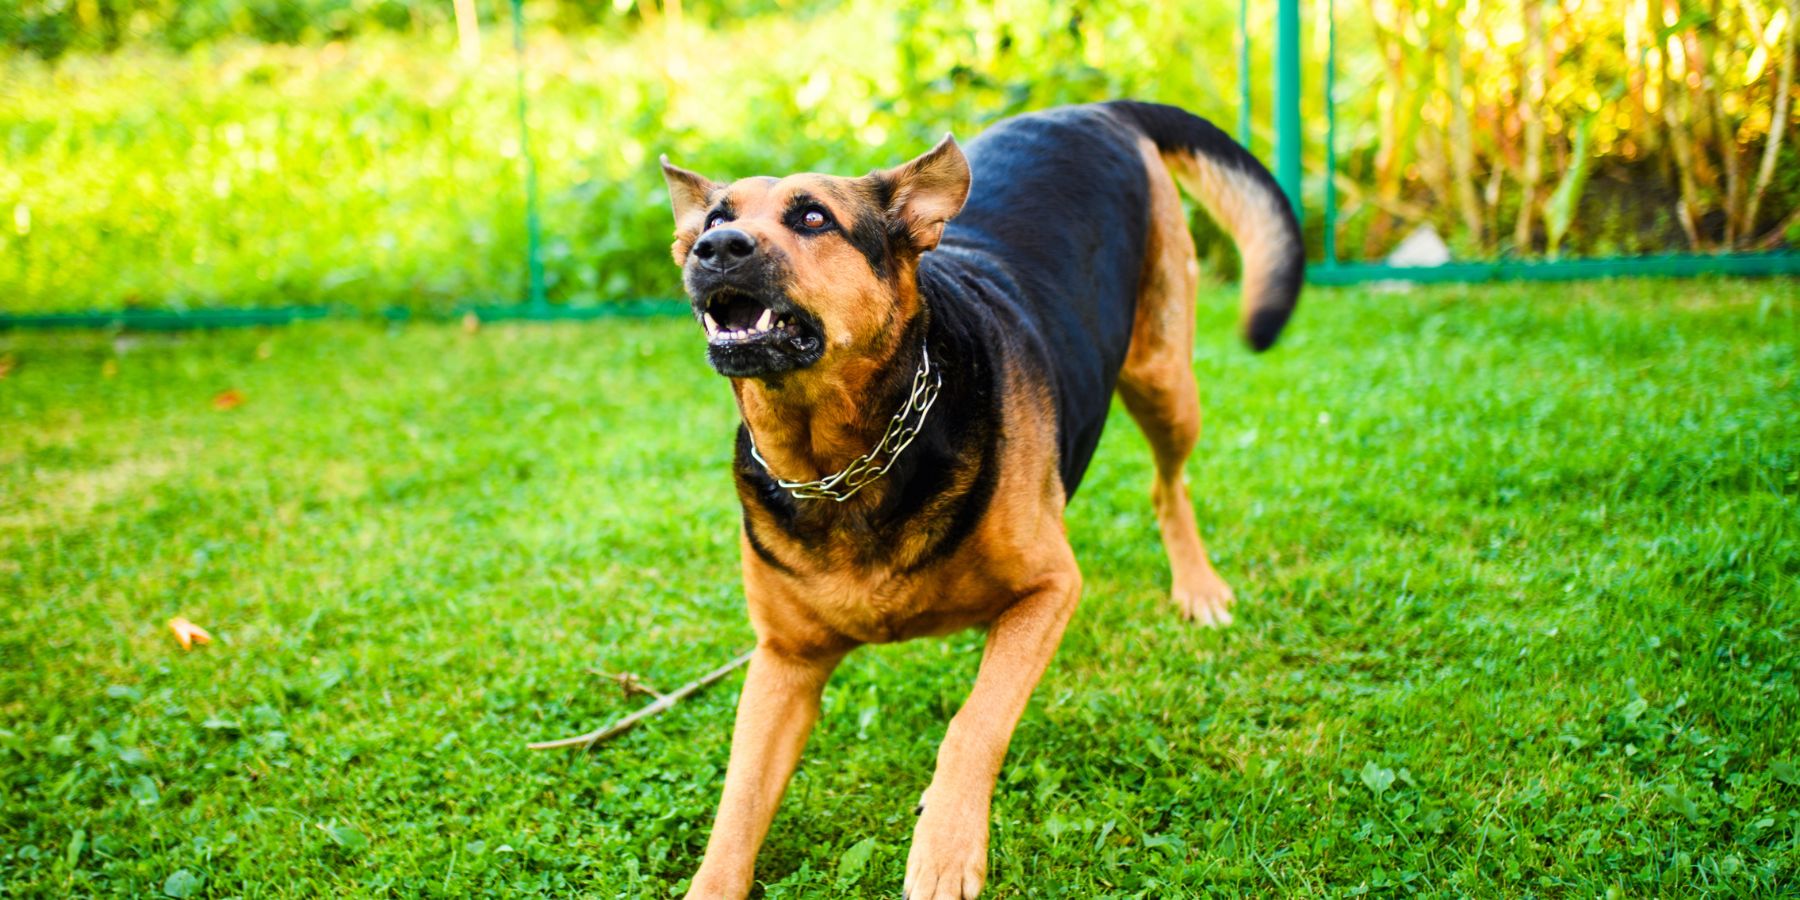 Establishing Trust and Mitigating Aggression in DogsBuilding a Foundation of Trust